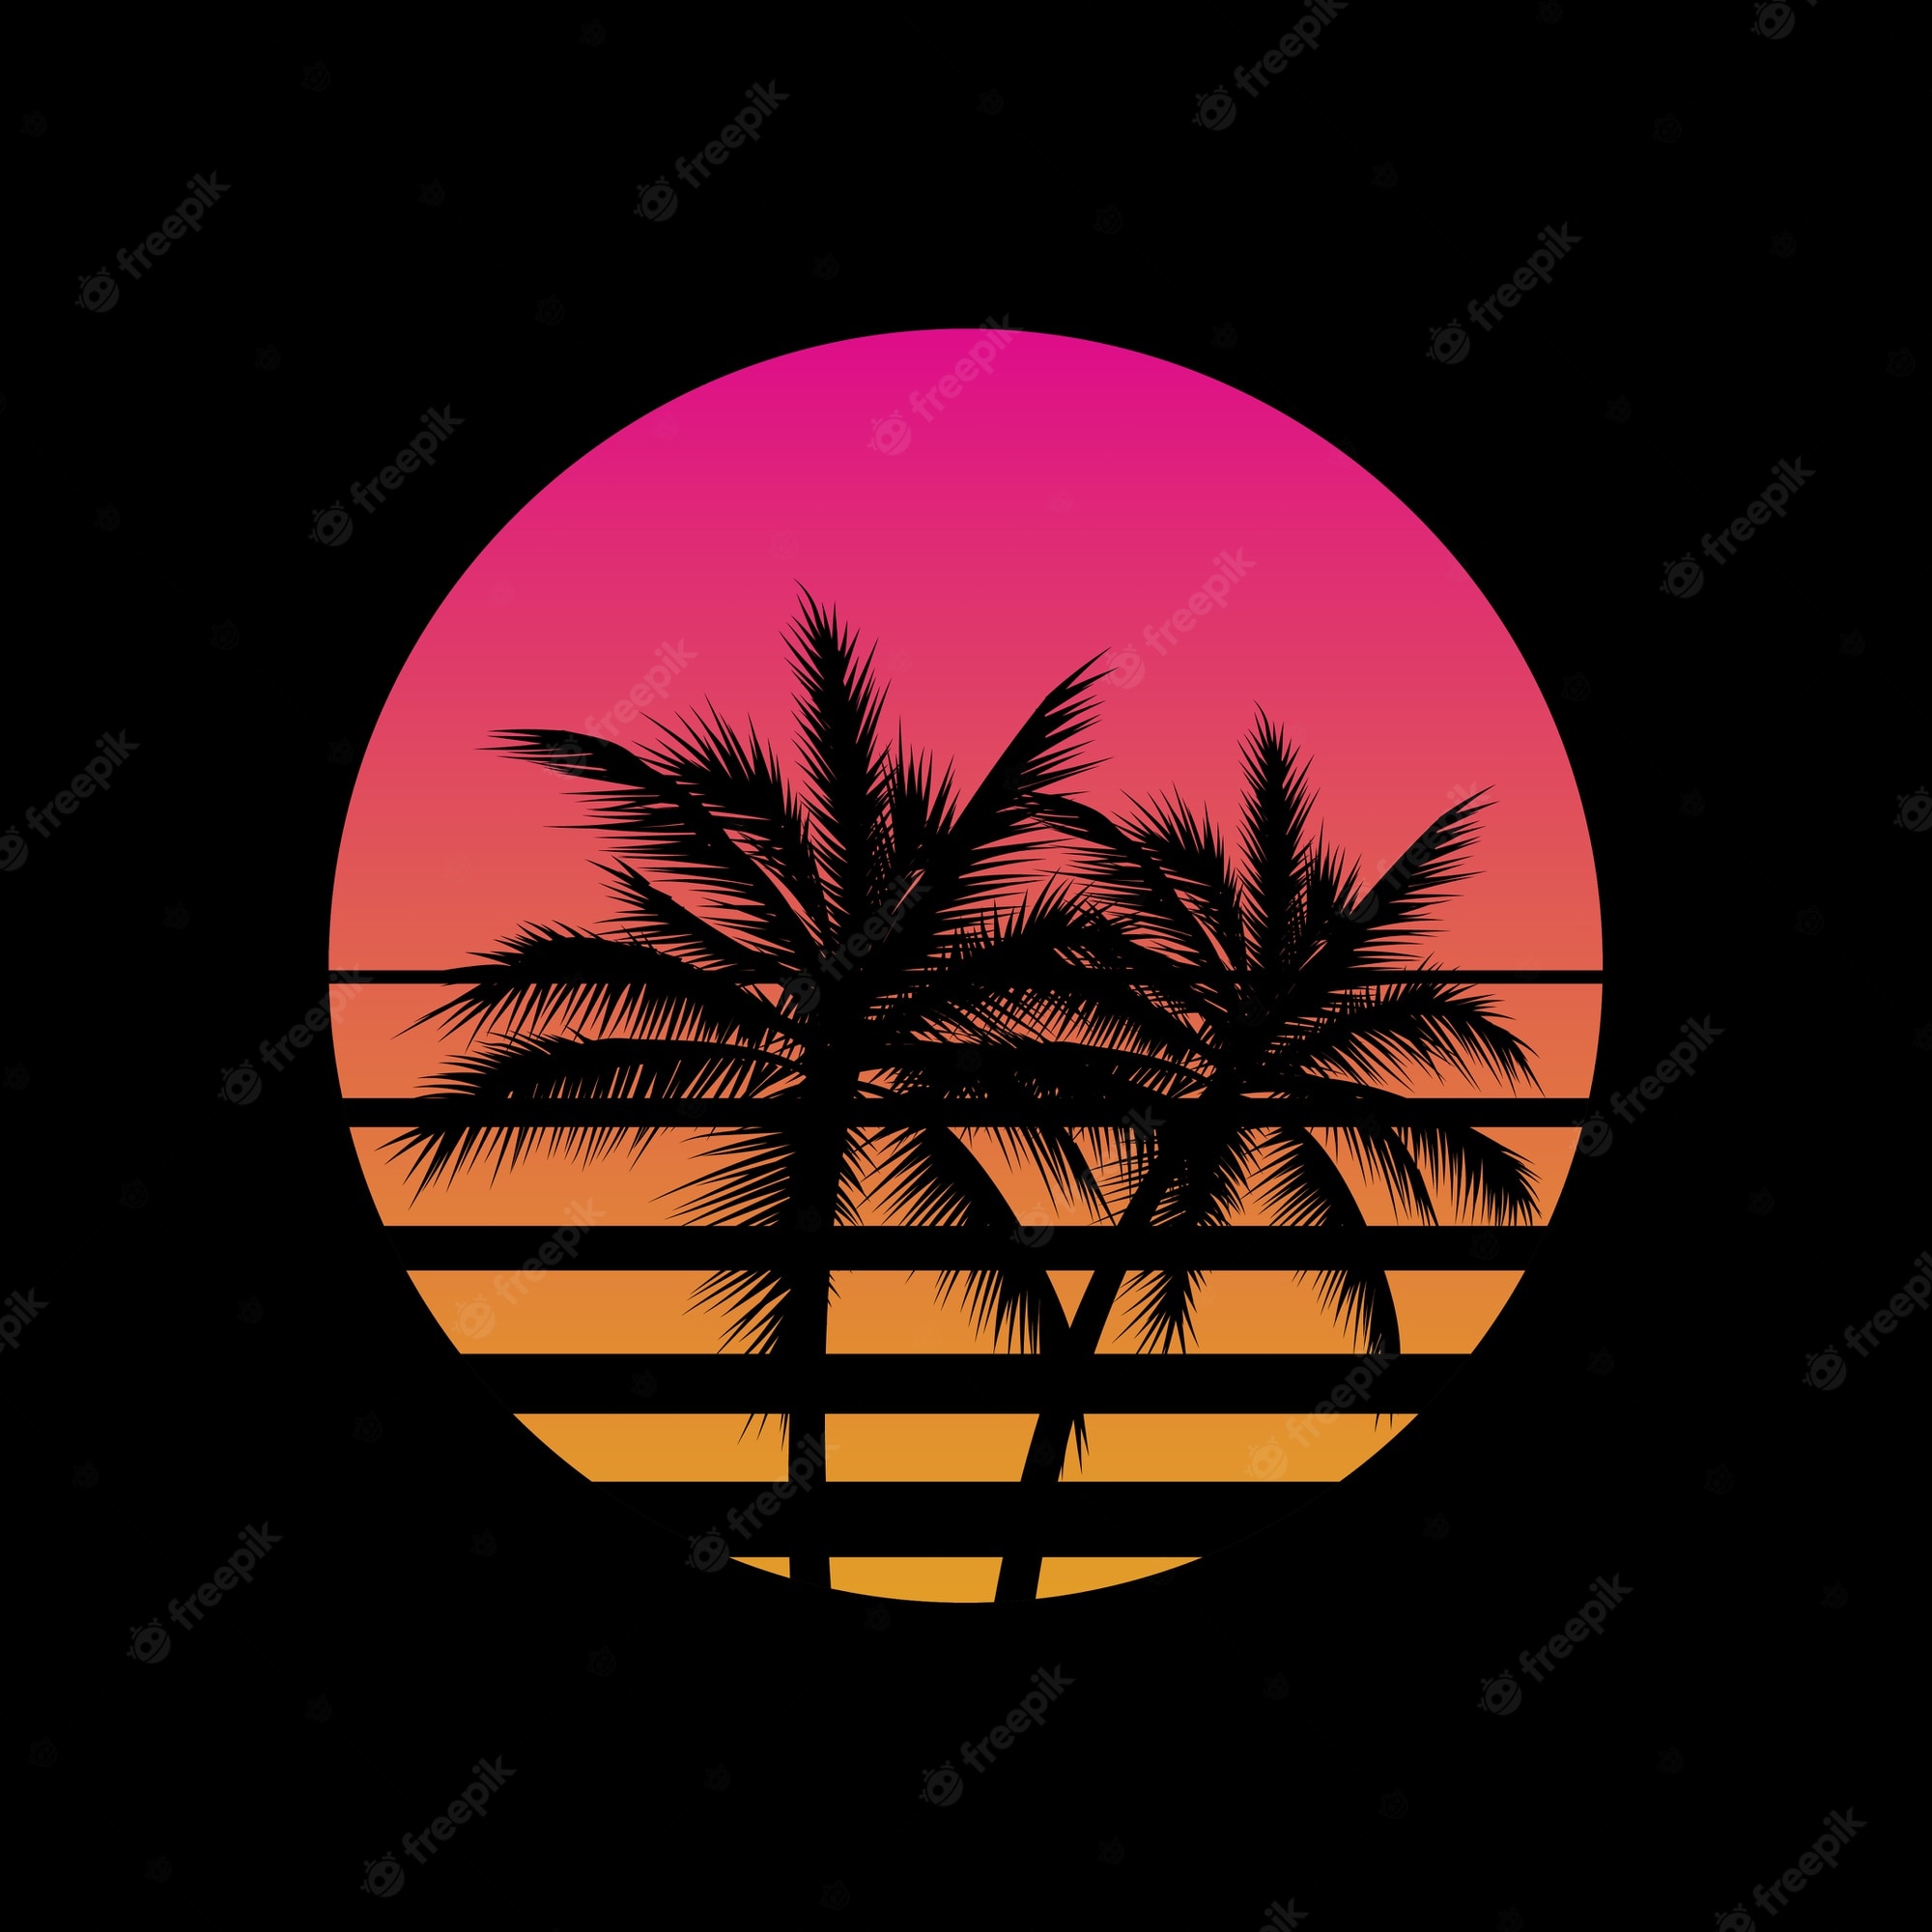 Premium Vector Vintage Styled Sunset With Palm Trees Silhouettes